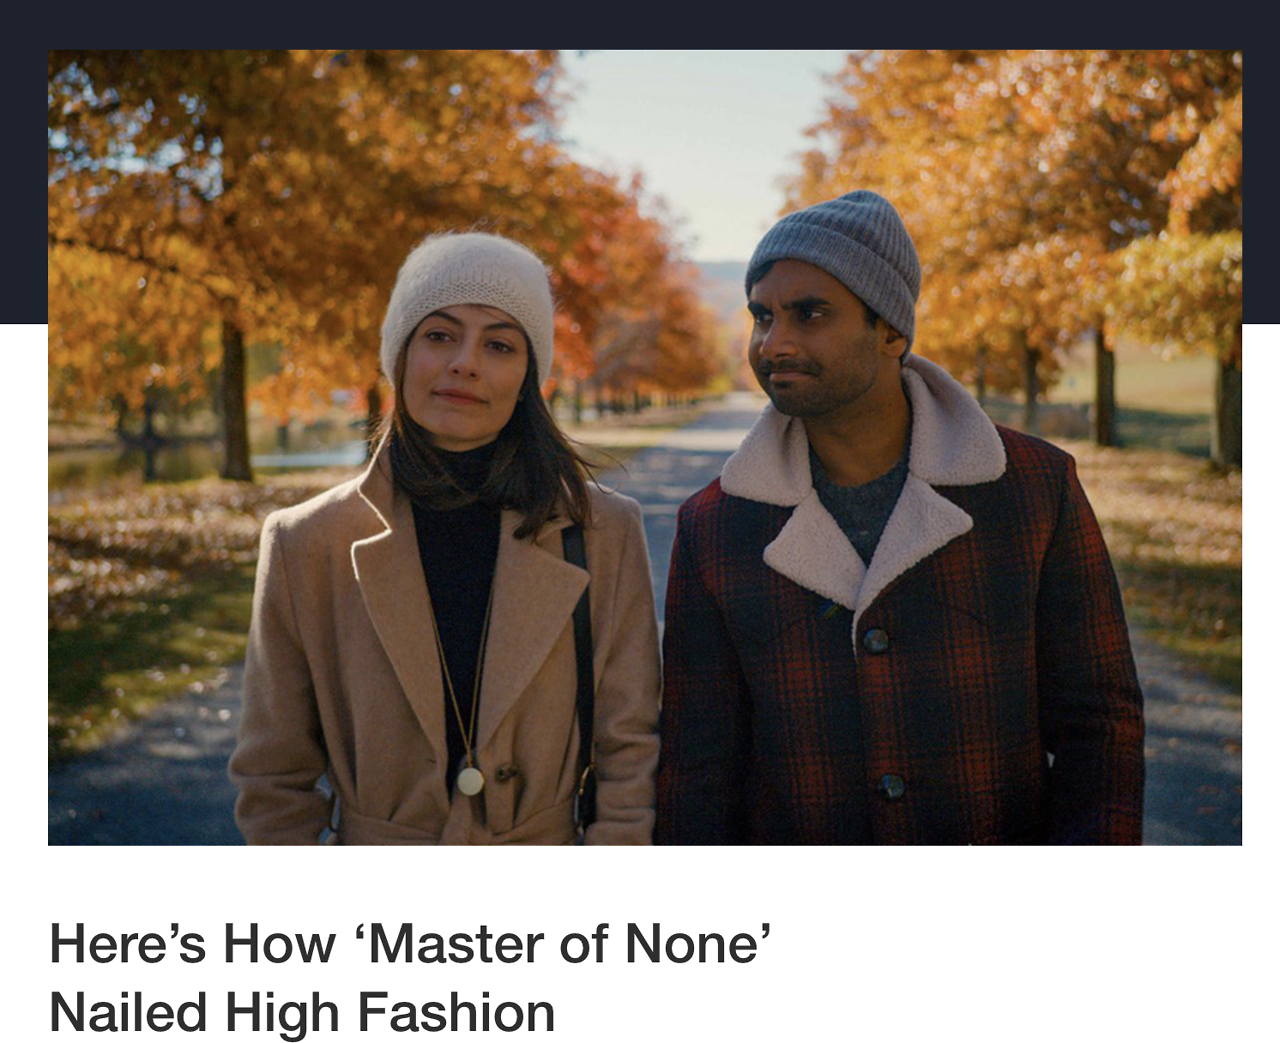 Image of Aziz Ansari walking with a woman in a park from Master of None